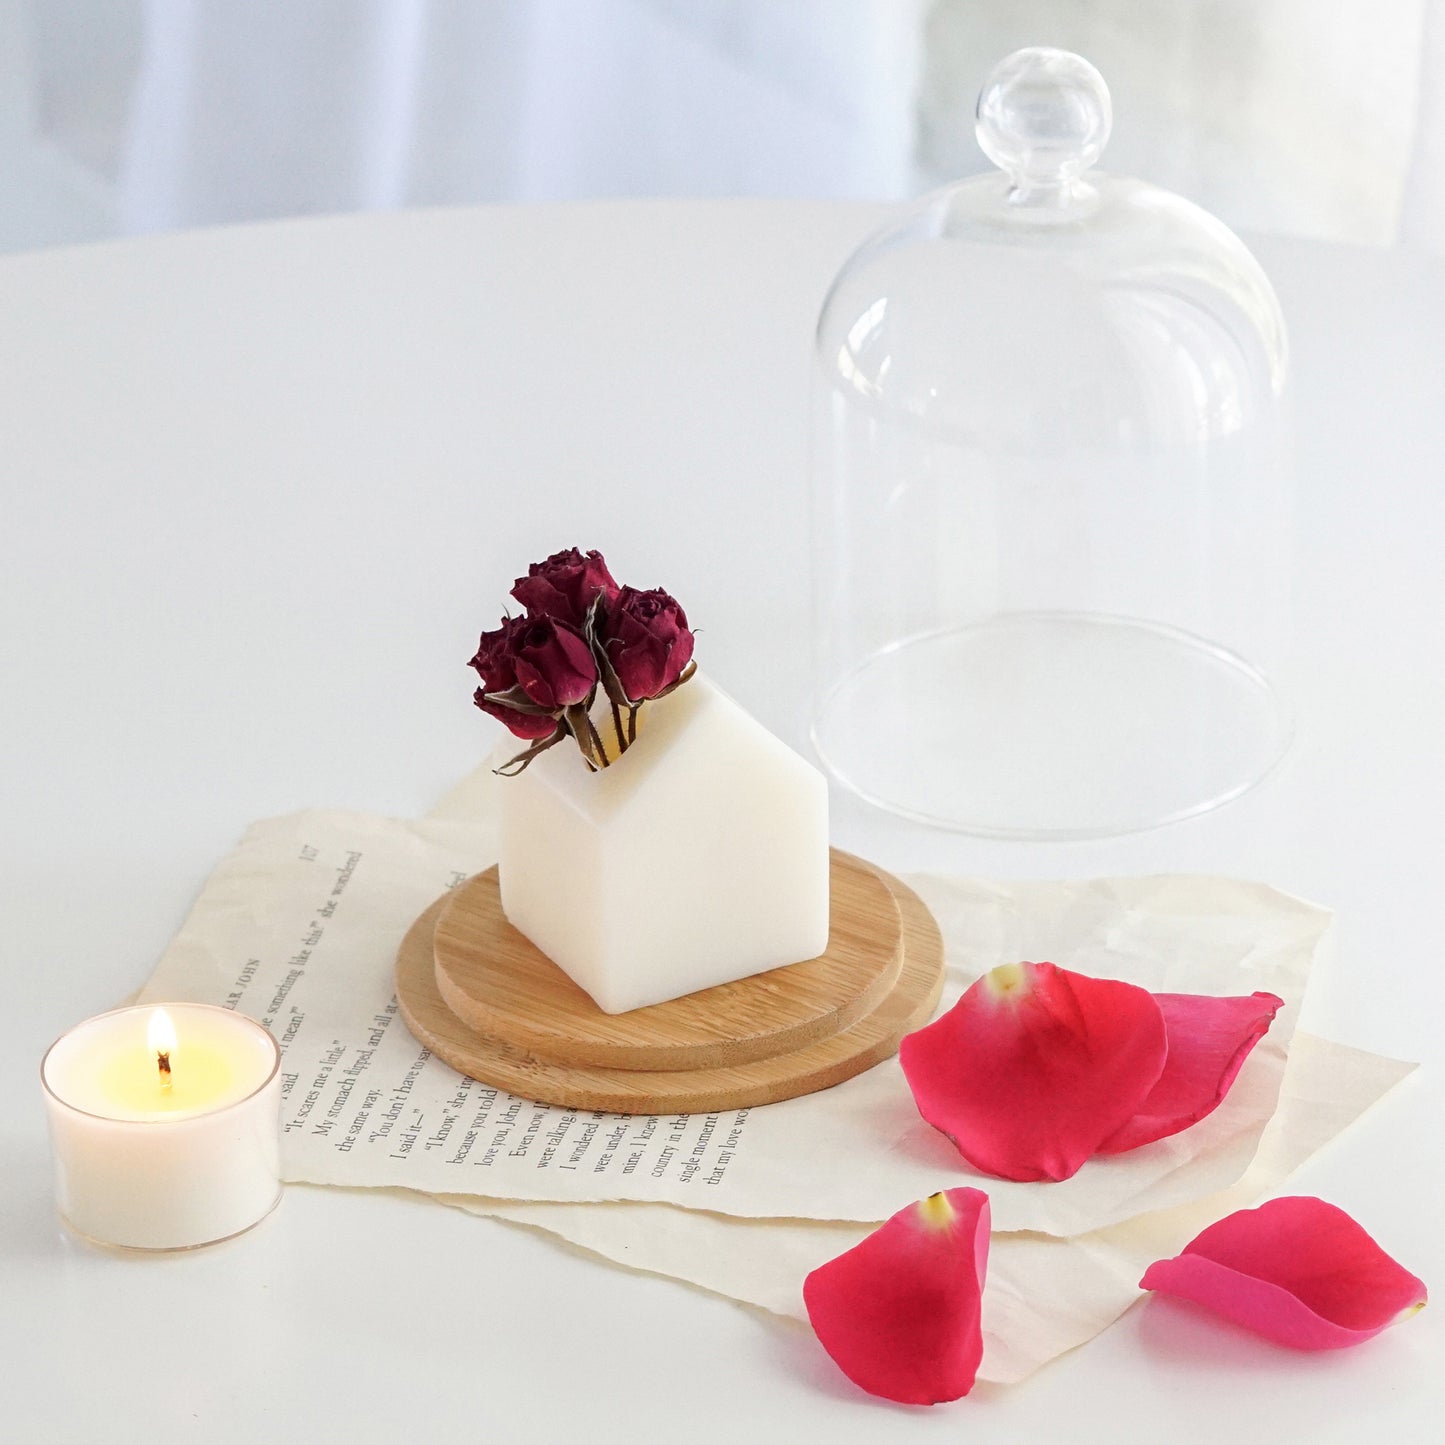 mini house white scented wax with burgundy dried roses on round wood coaster, rose petals, and a lit tealight candle placed on book pages